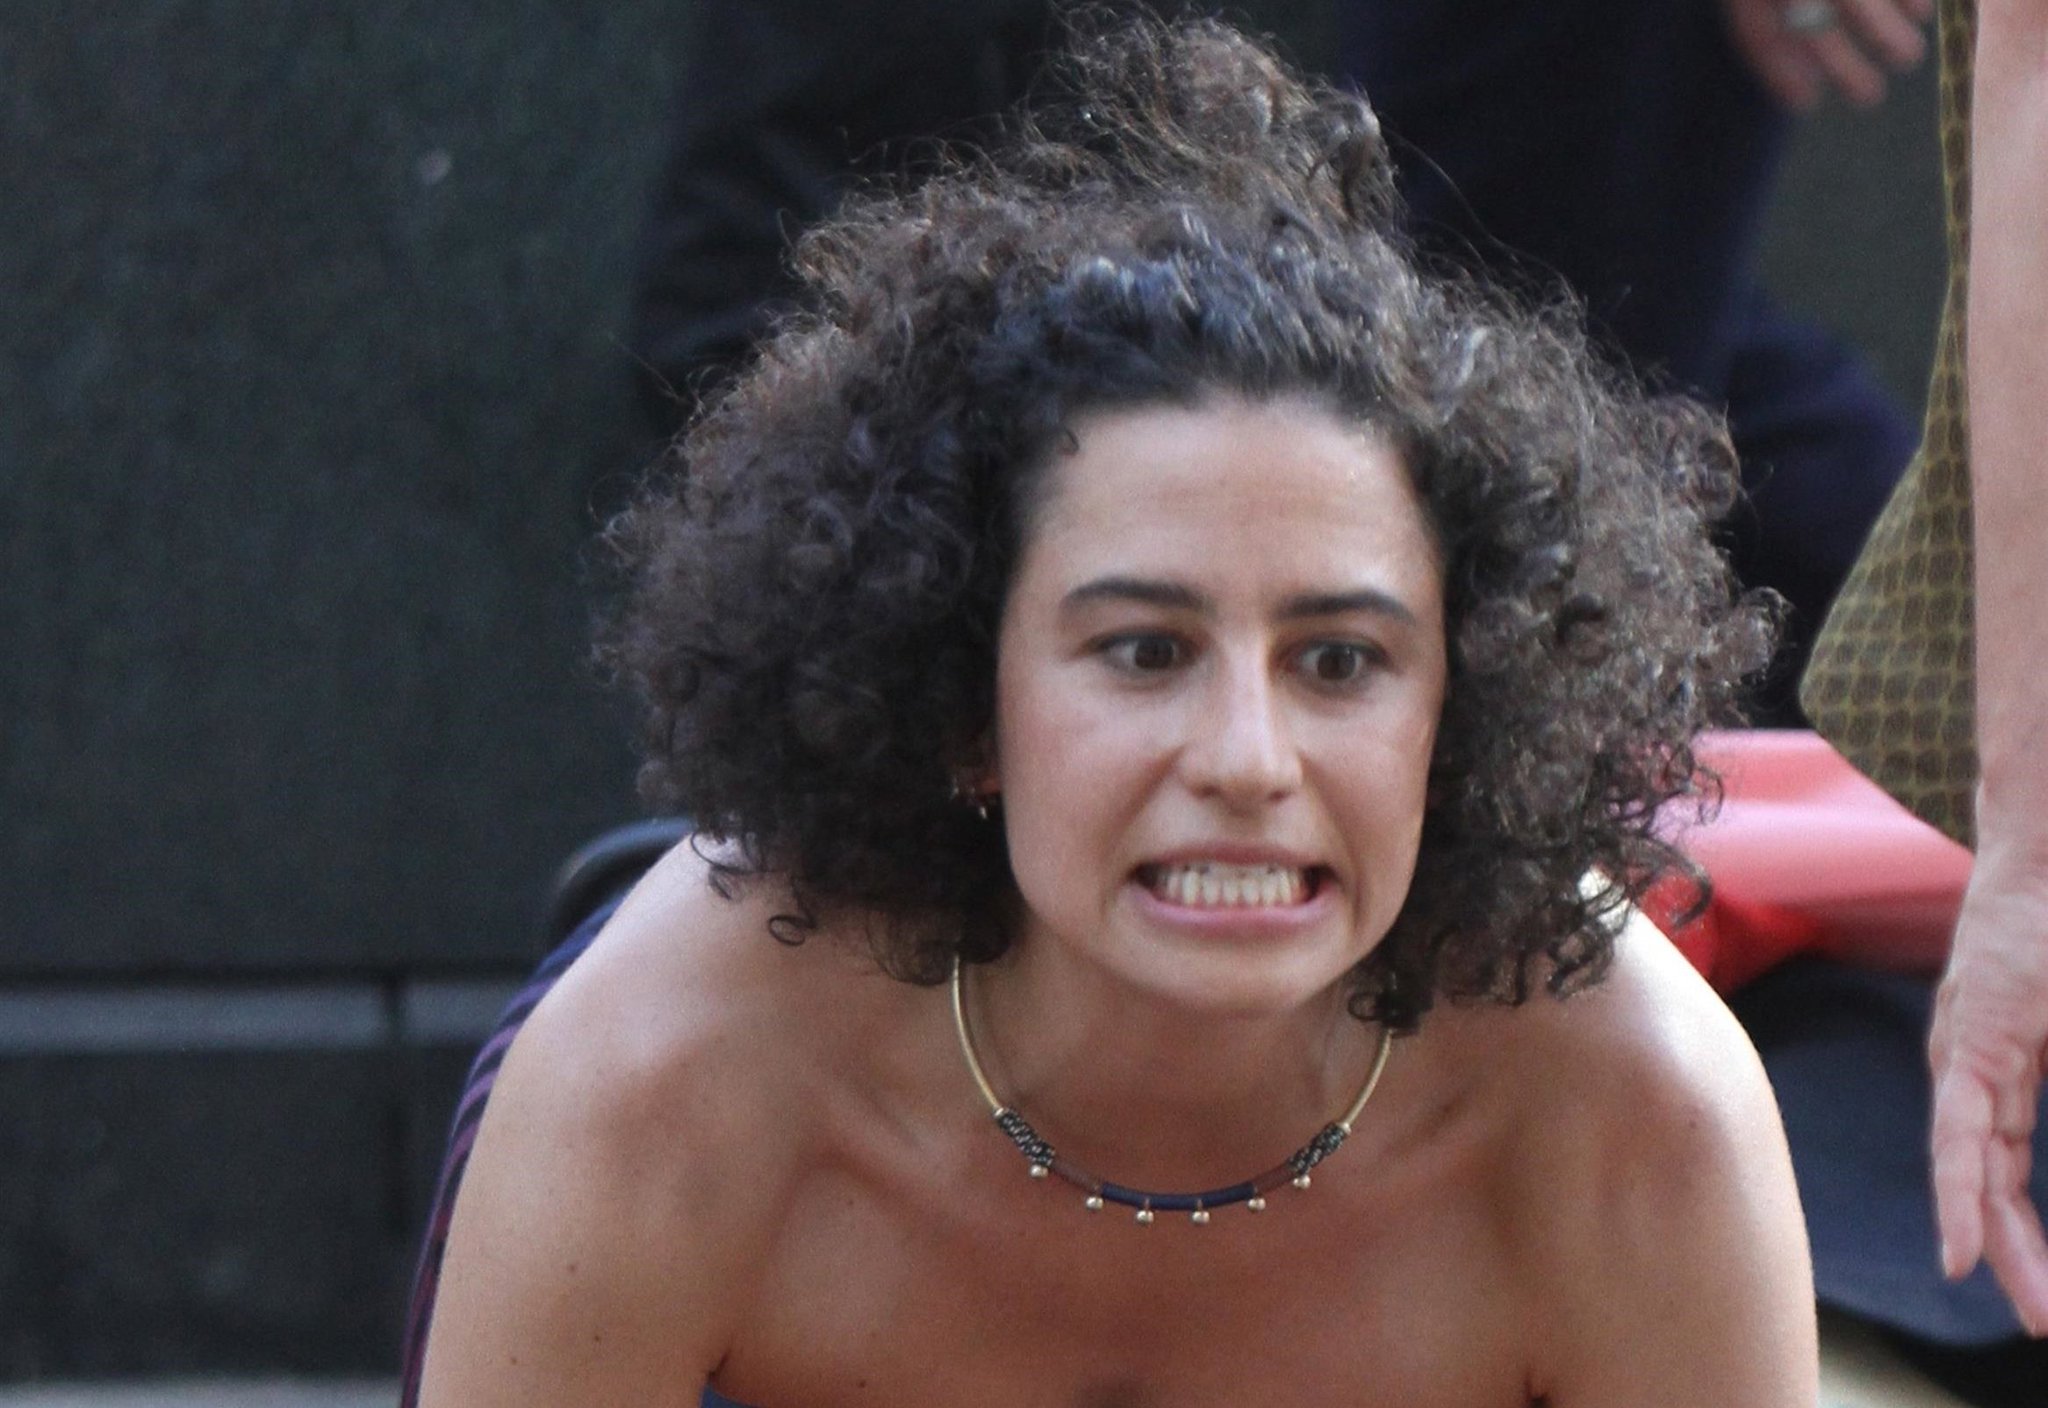 “PHOTOS: Ilana Glazer looks hot (literally) as she films in scorching NYC t...